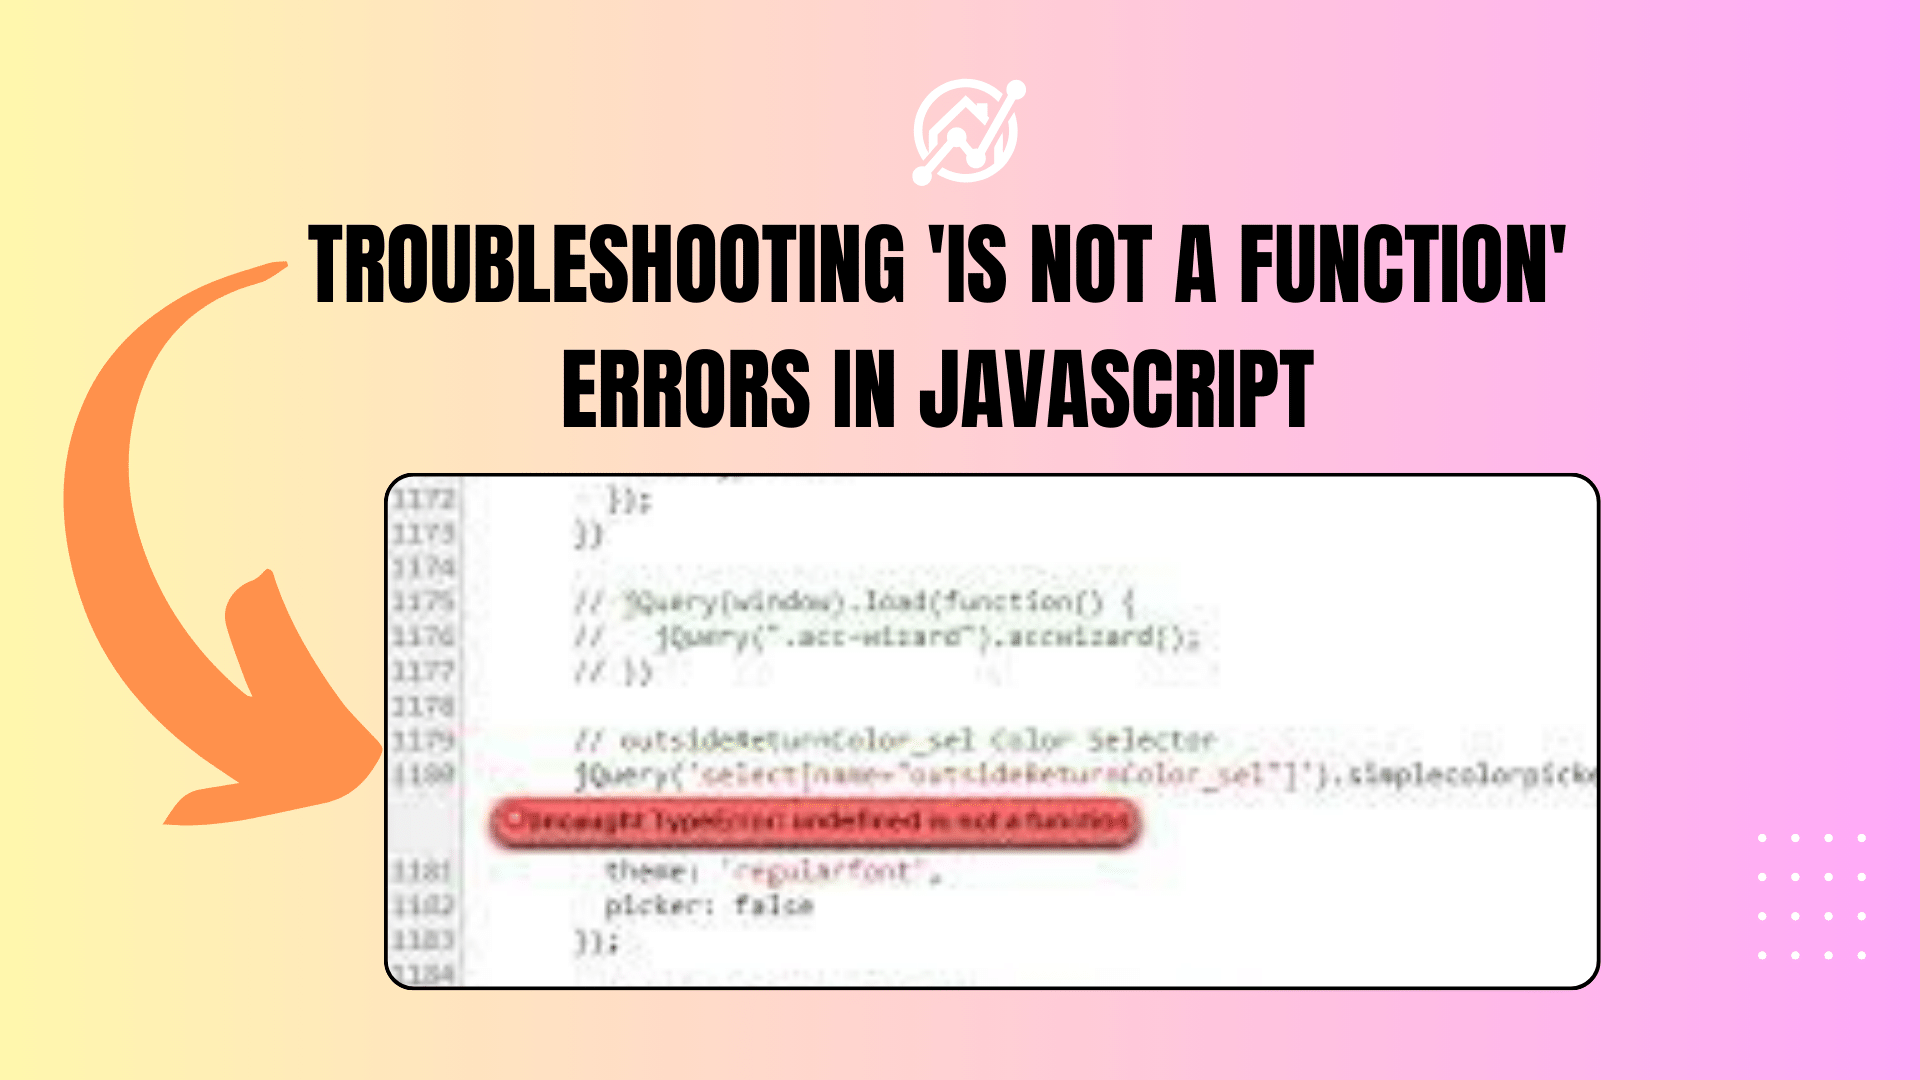 Troubleshooting 'is not a function' errors in JavaScript